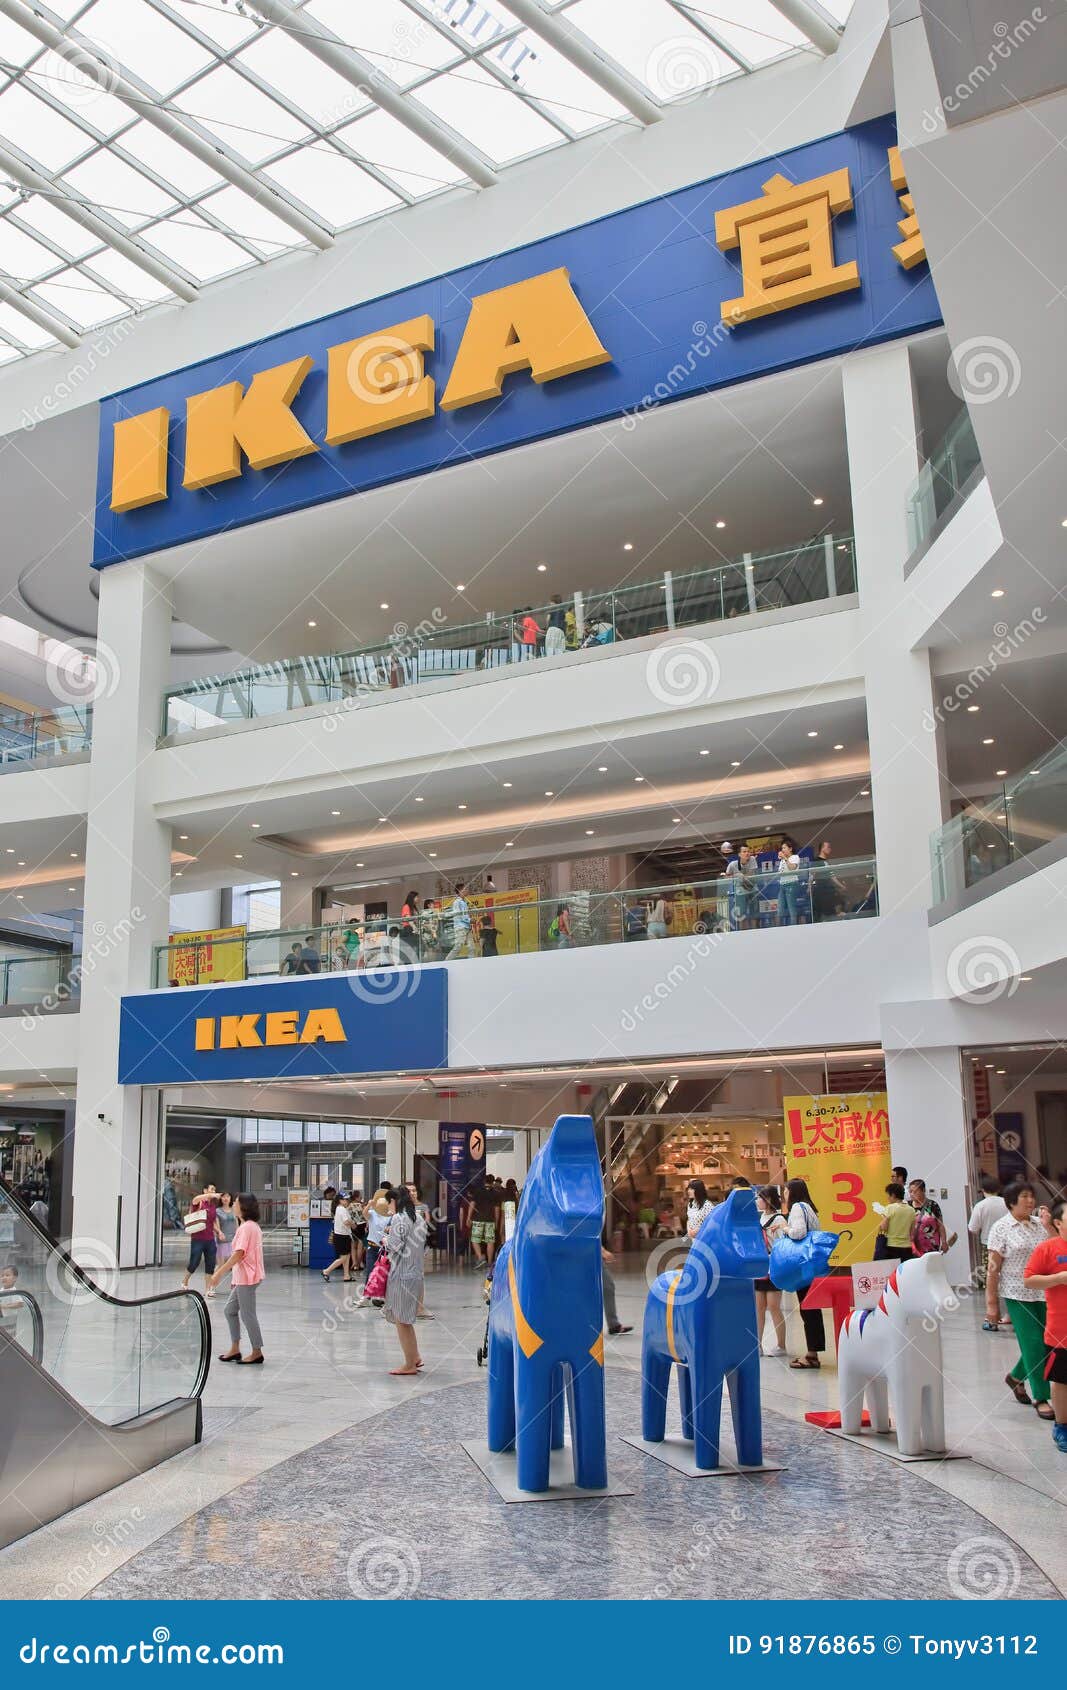 IKEA Outlet Inside Livat Shopping Mall, Beijing, China Editorial Image - of balustrade, identity: 91876865